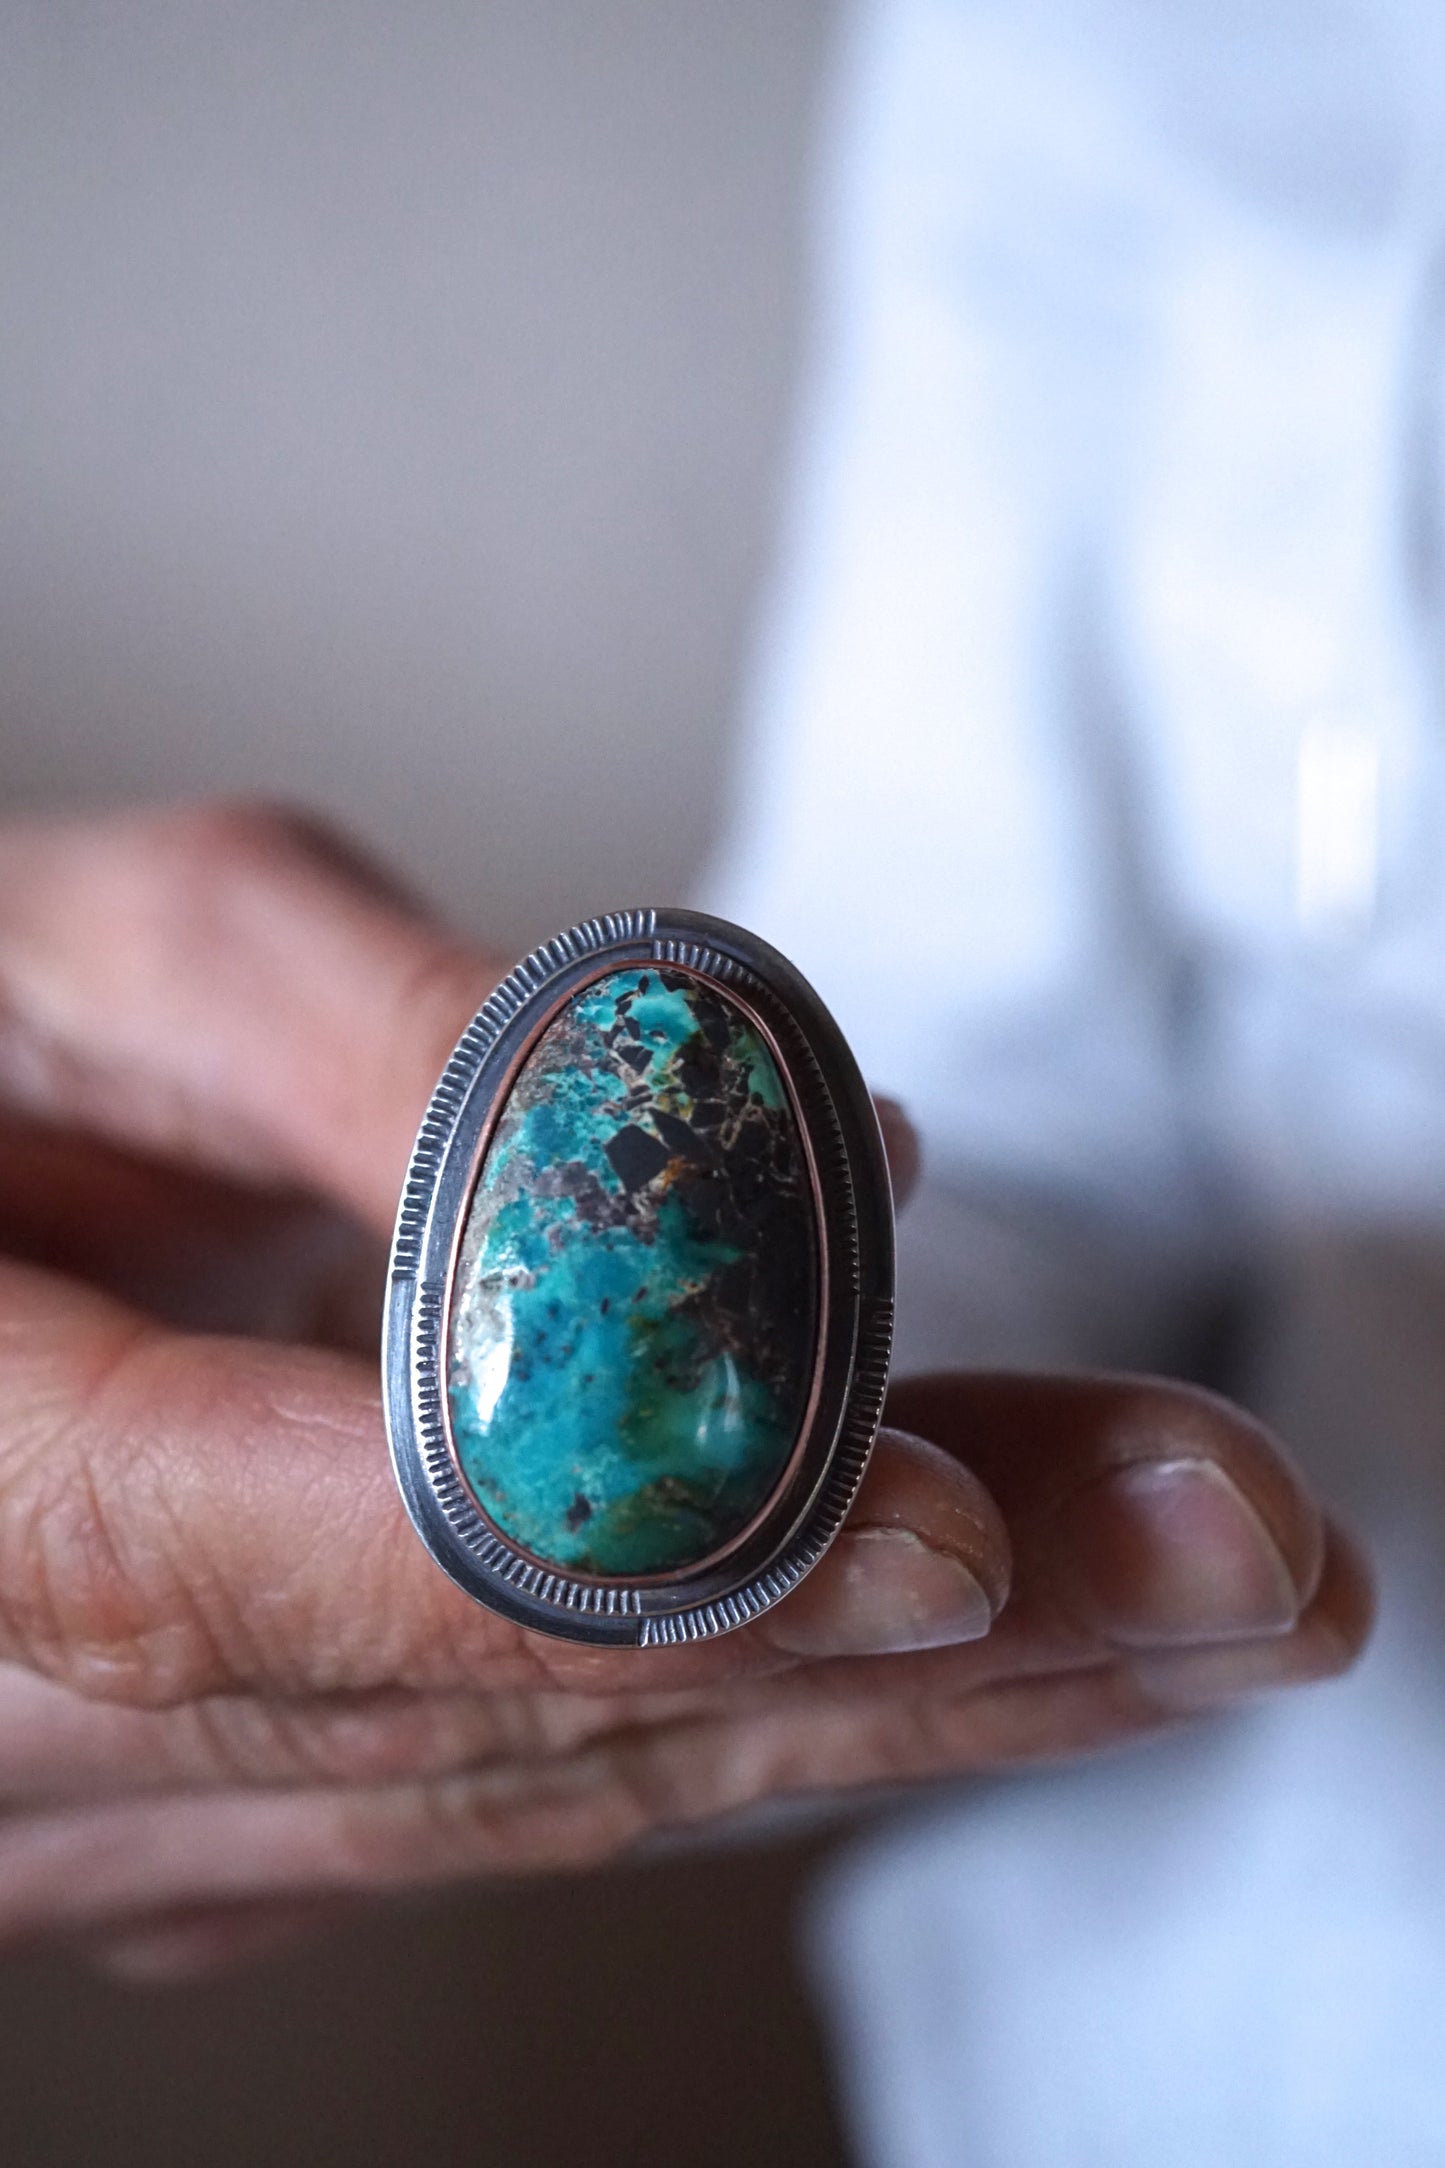 thunder mountain turquoise ring with copper accents - size 10 - Lumenrose